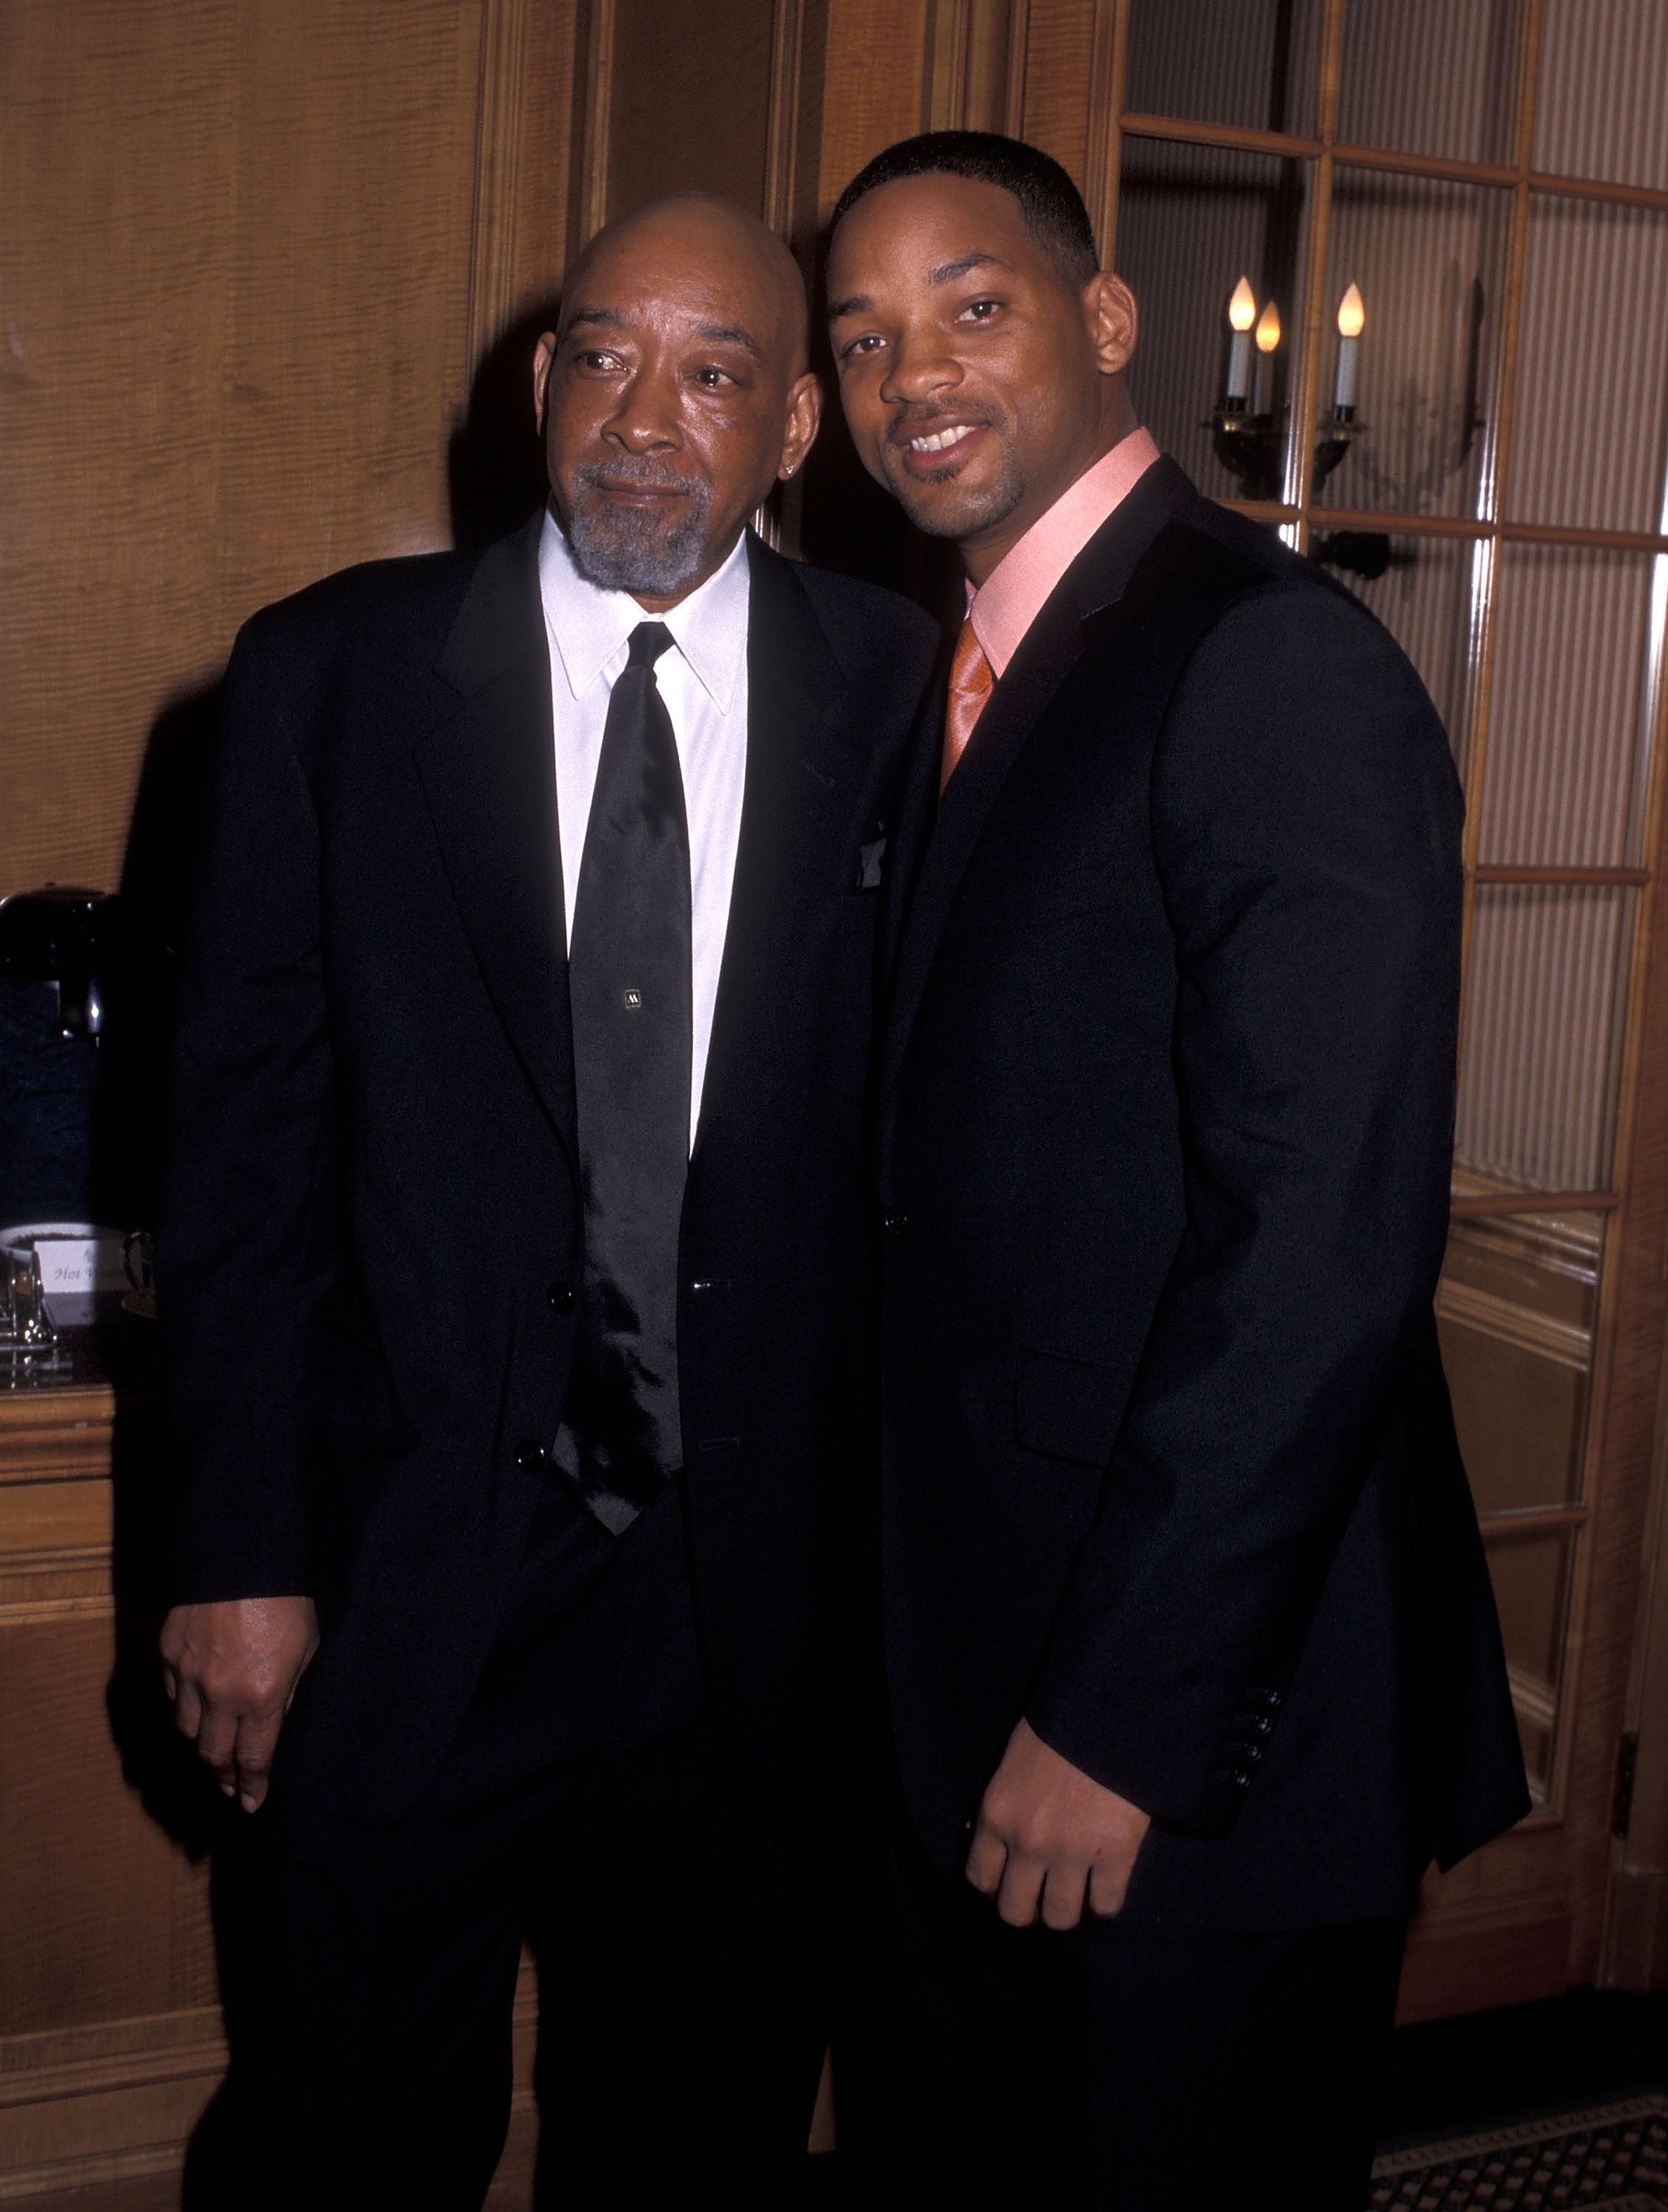 Willard and Will Smith at the Tree of Life Awards on March 23, 2002, in Beverly Hills, California. | Source: Ron Galella/Ron Galella Collection/Getty Images